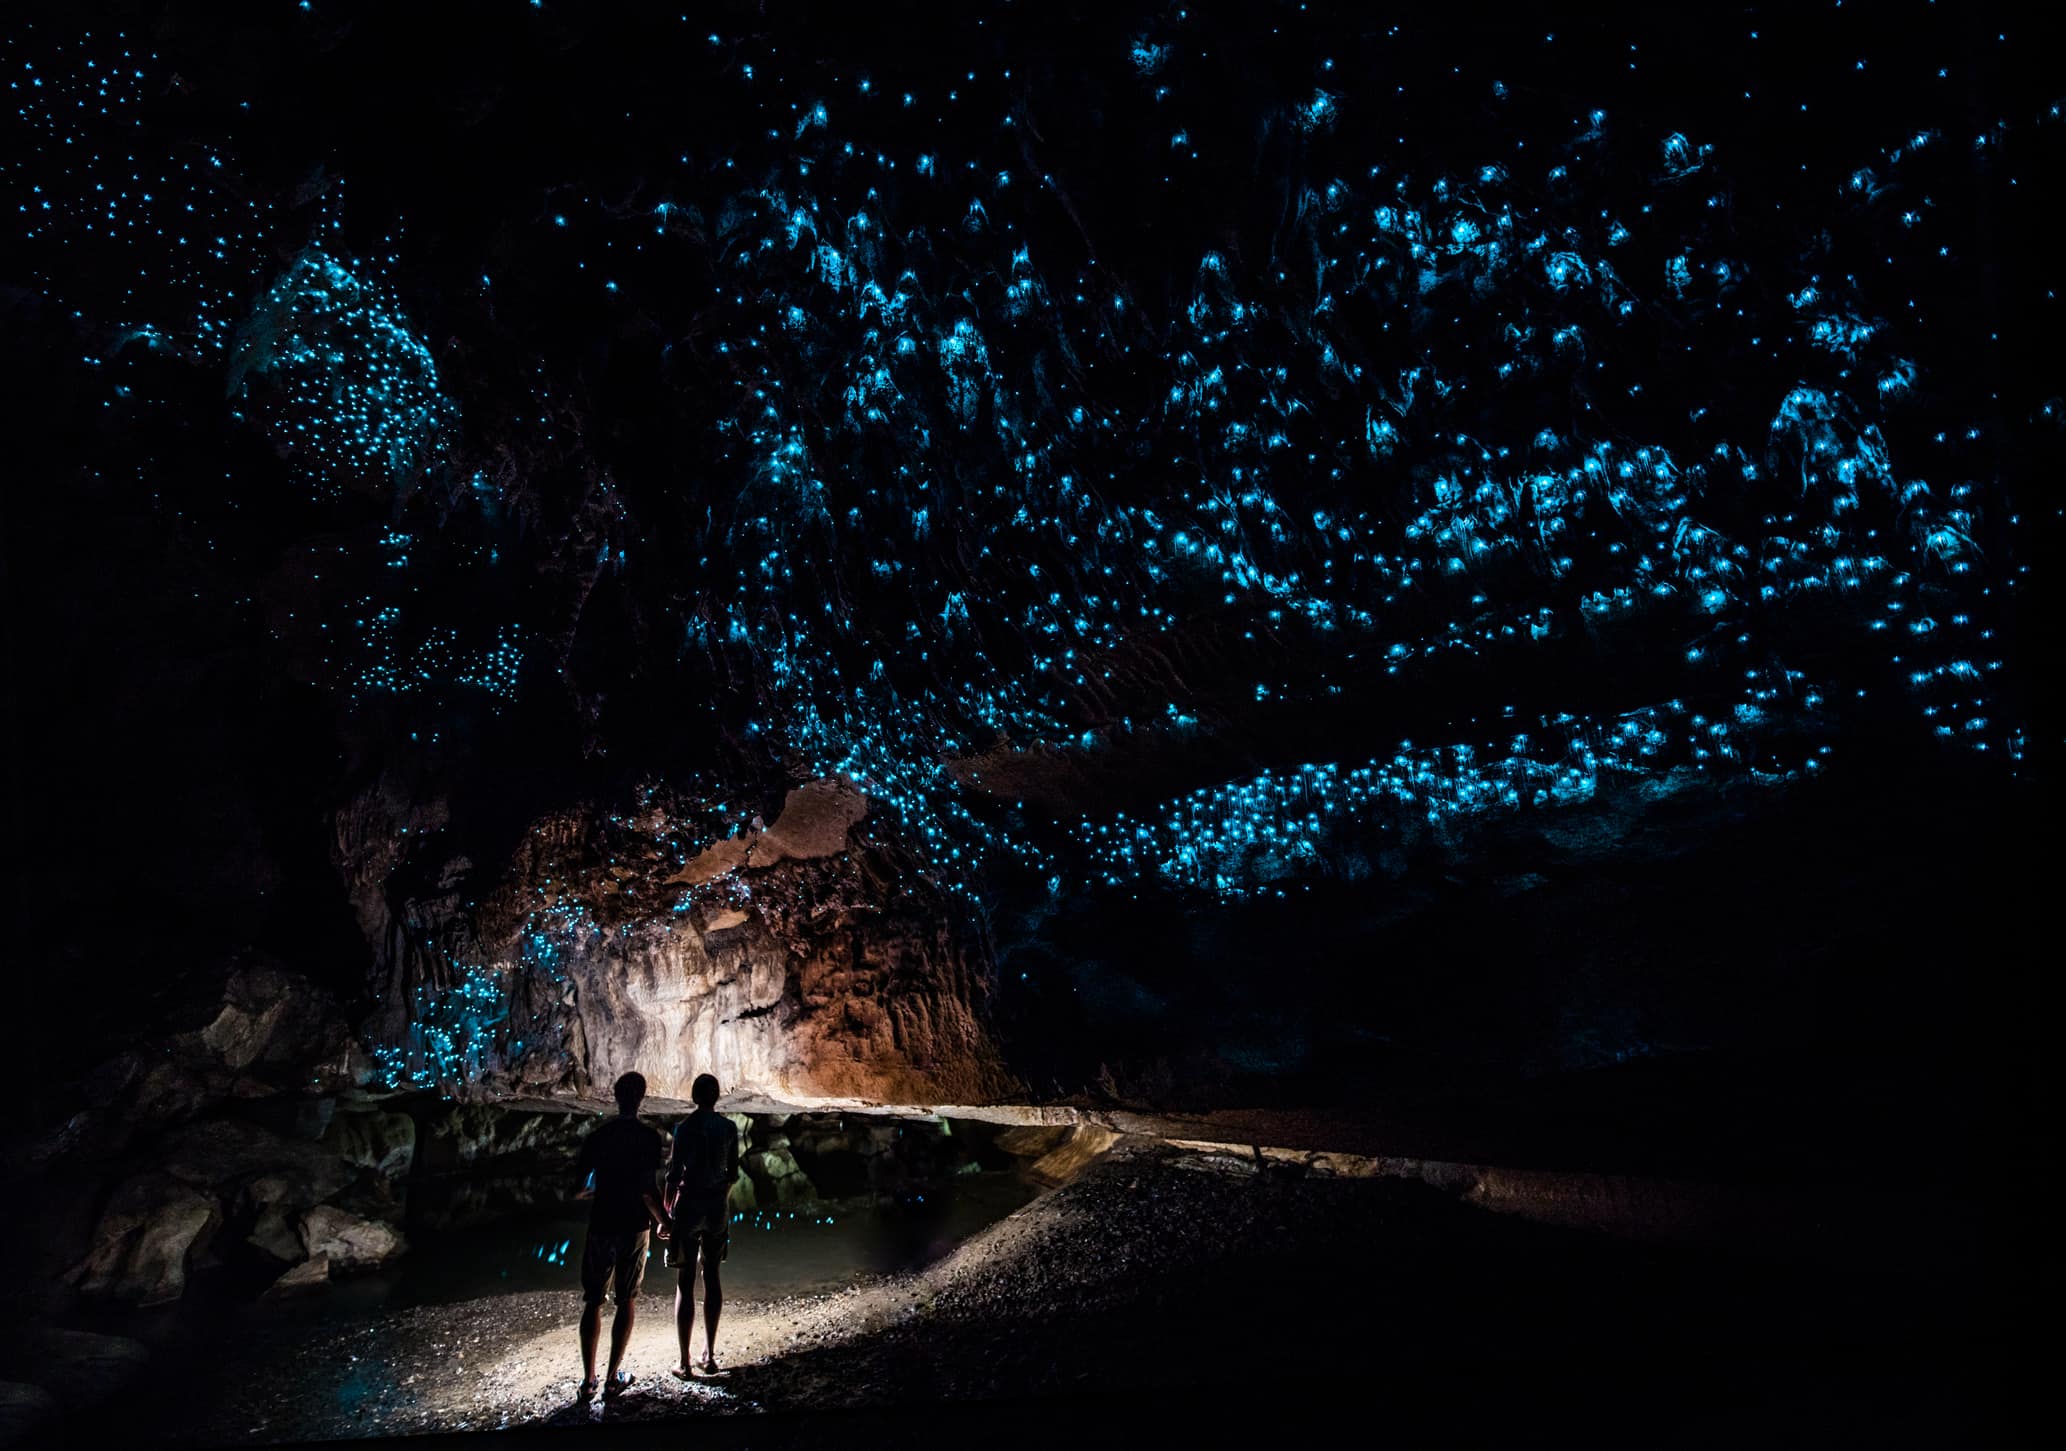 Couple standing underneath Glow Worm Sky in Waipu Cave, new Zealand